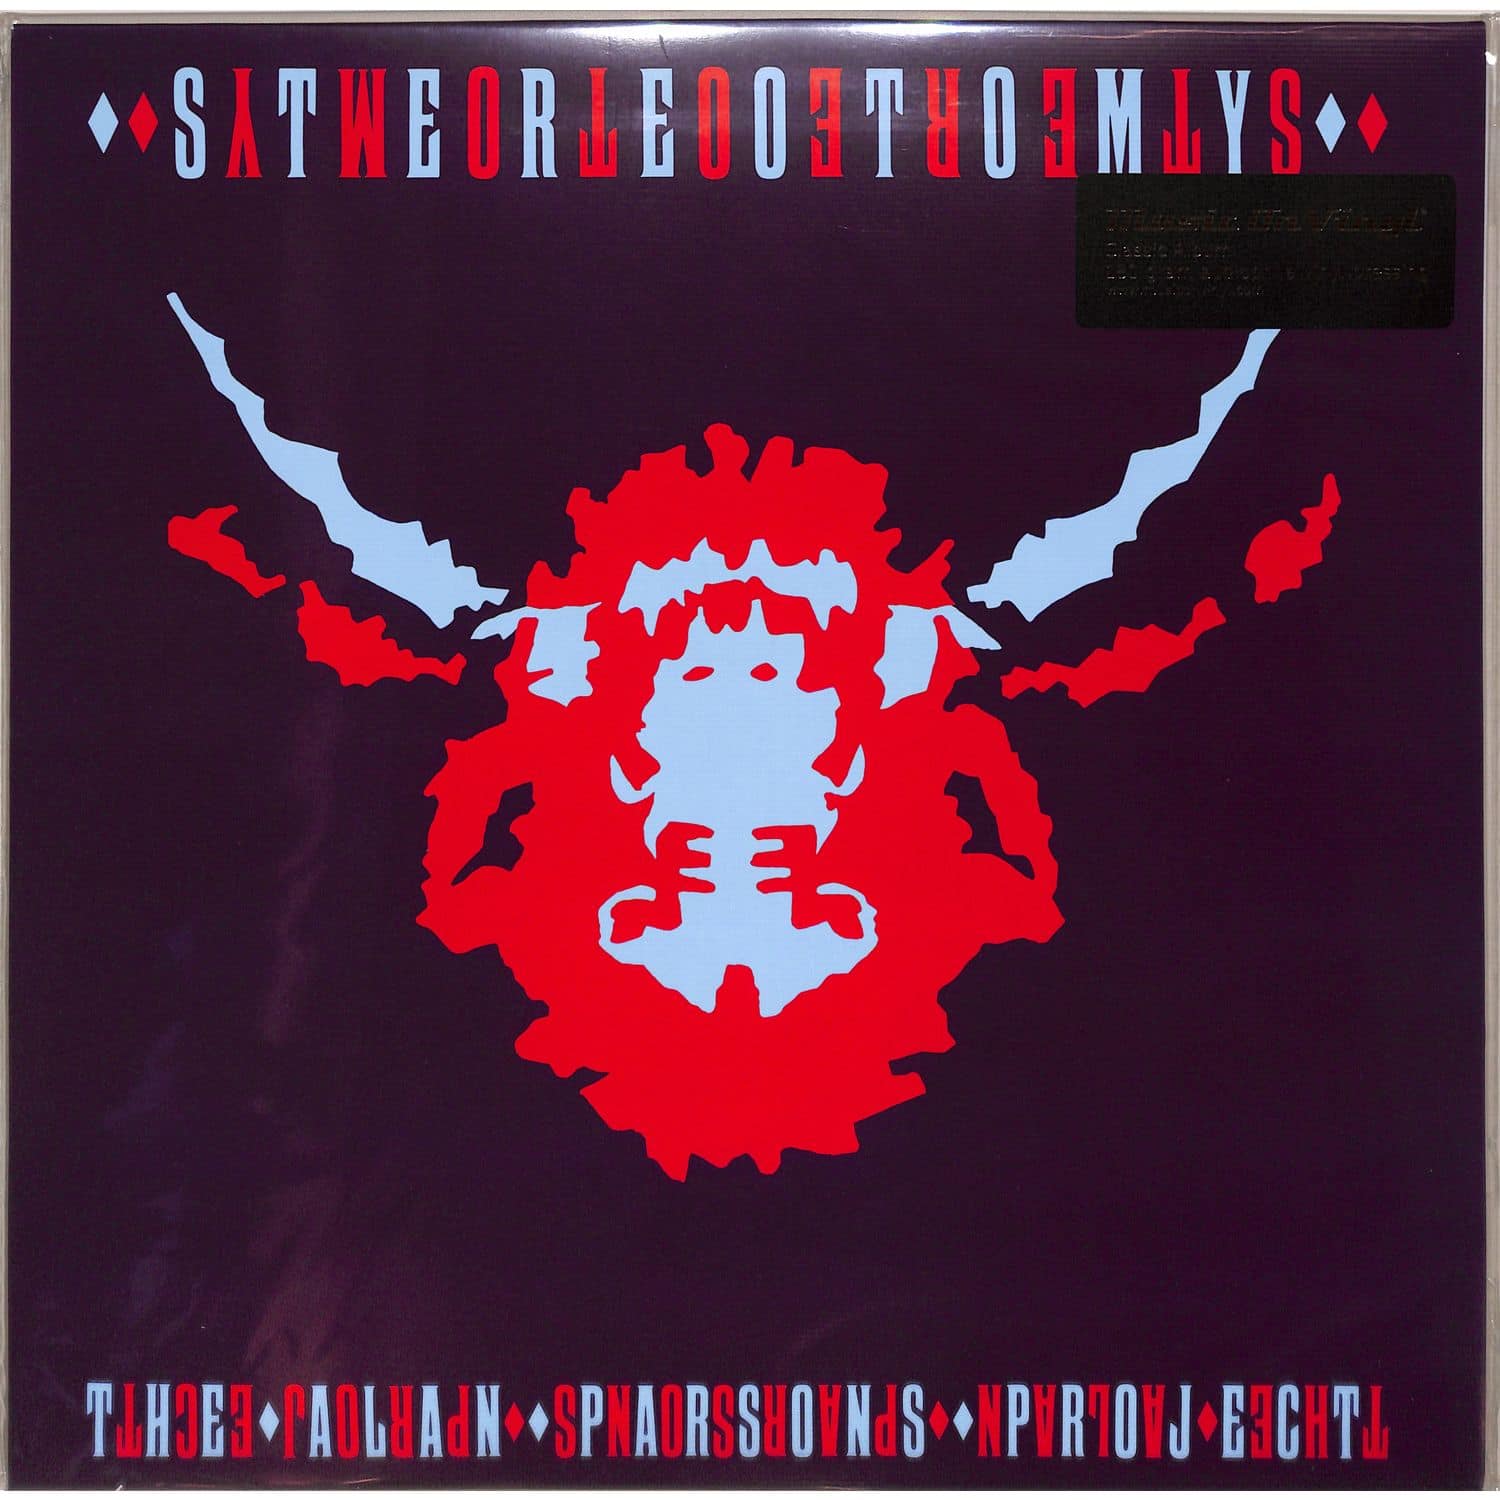 Alan Parsons Project - STEREOTOMY 